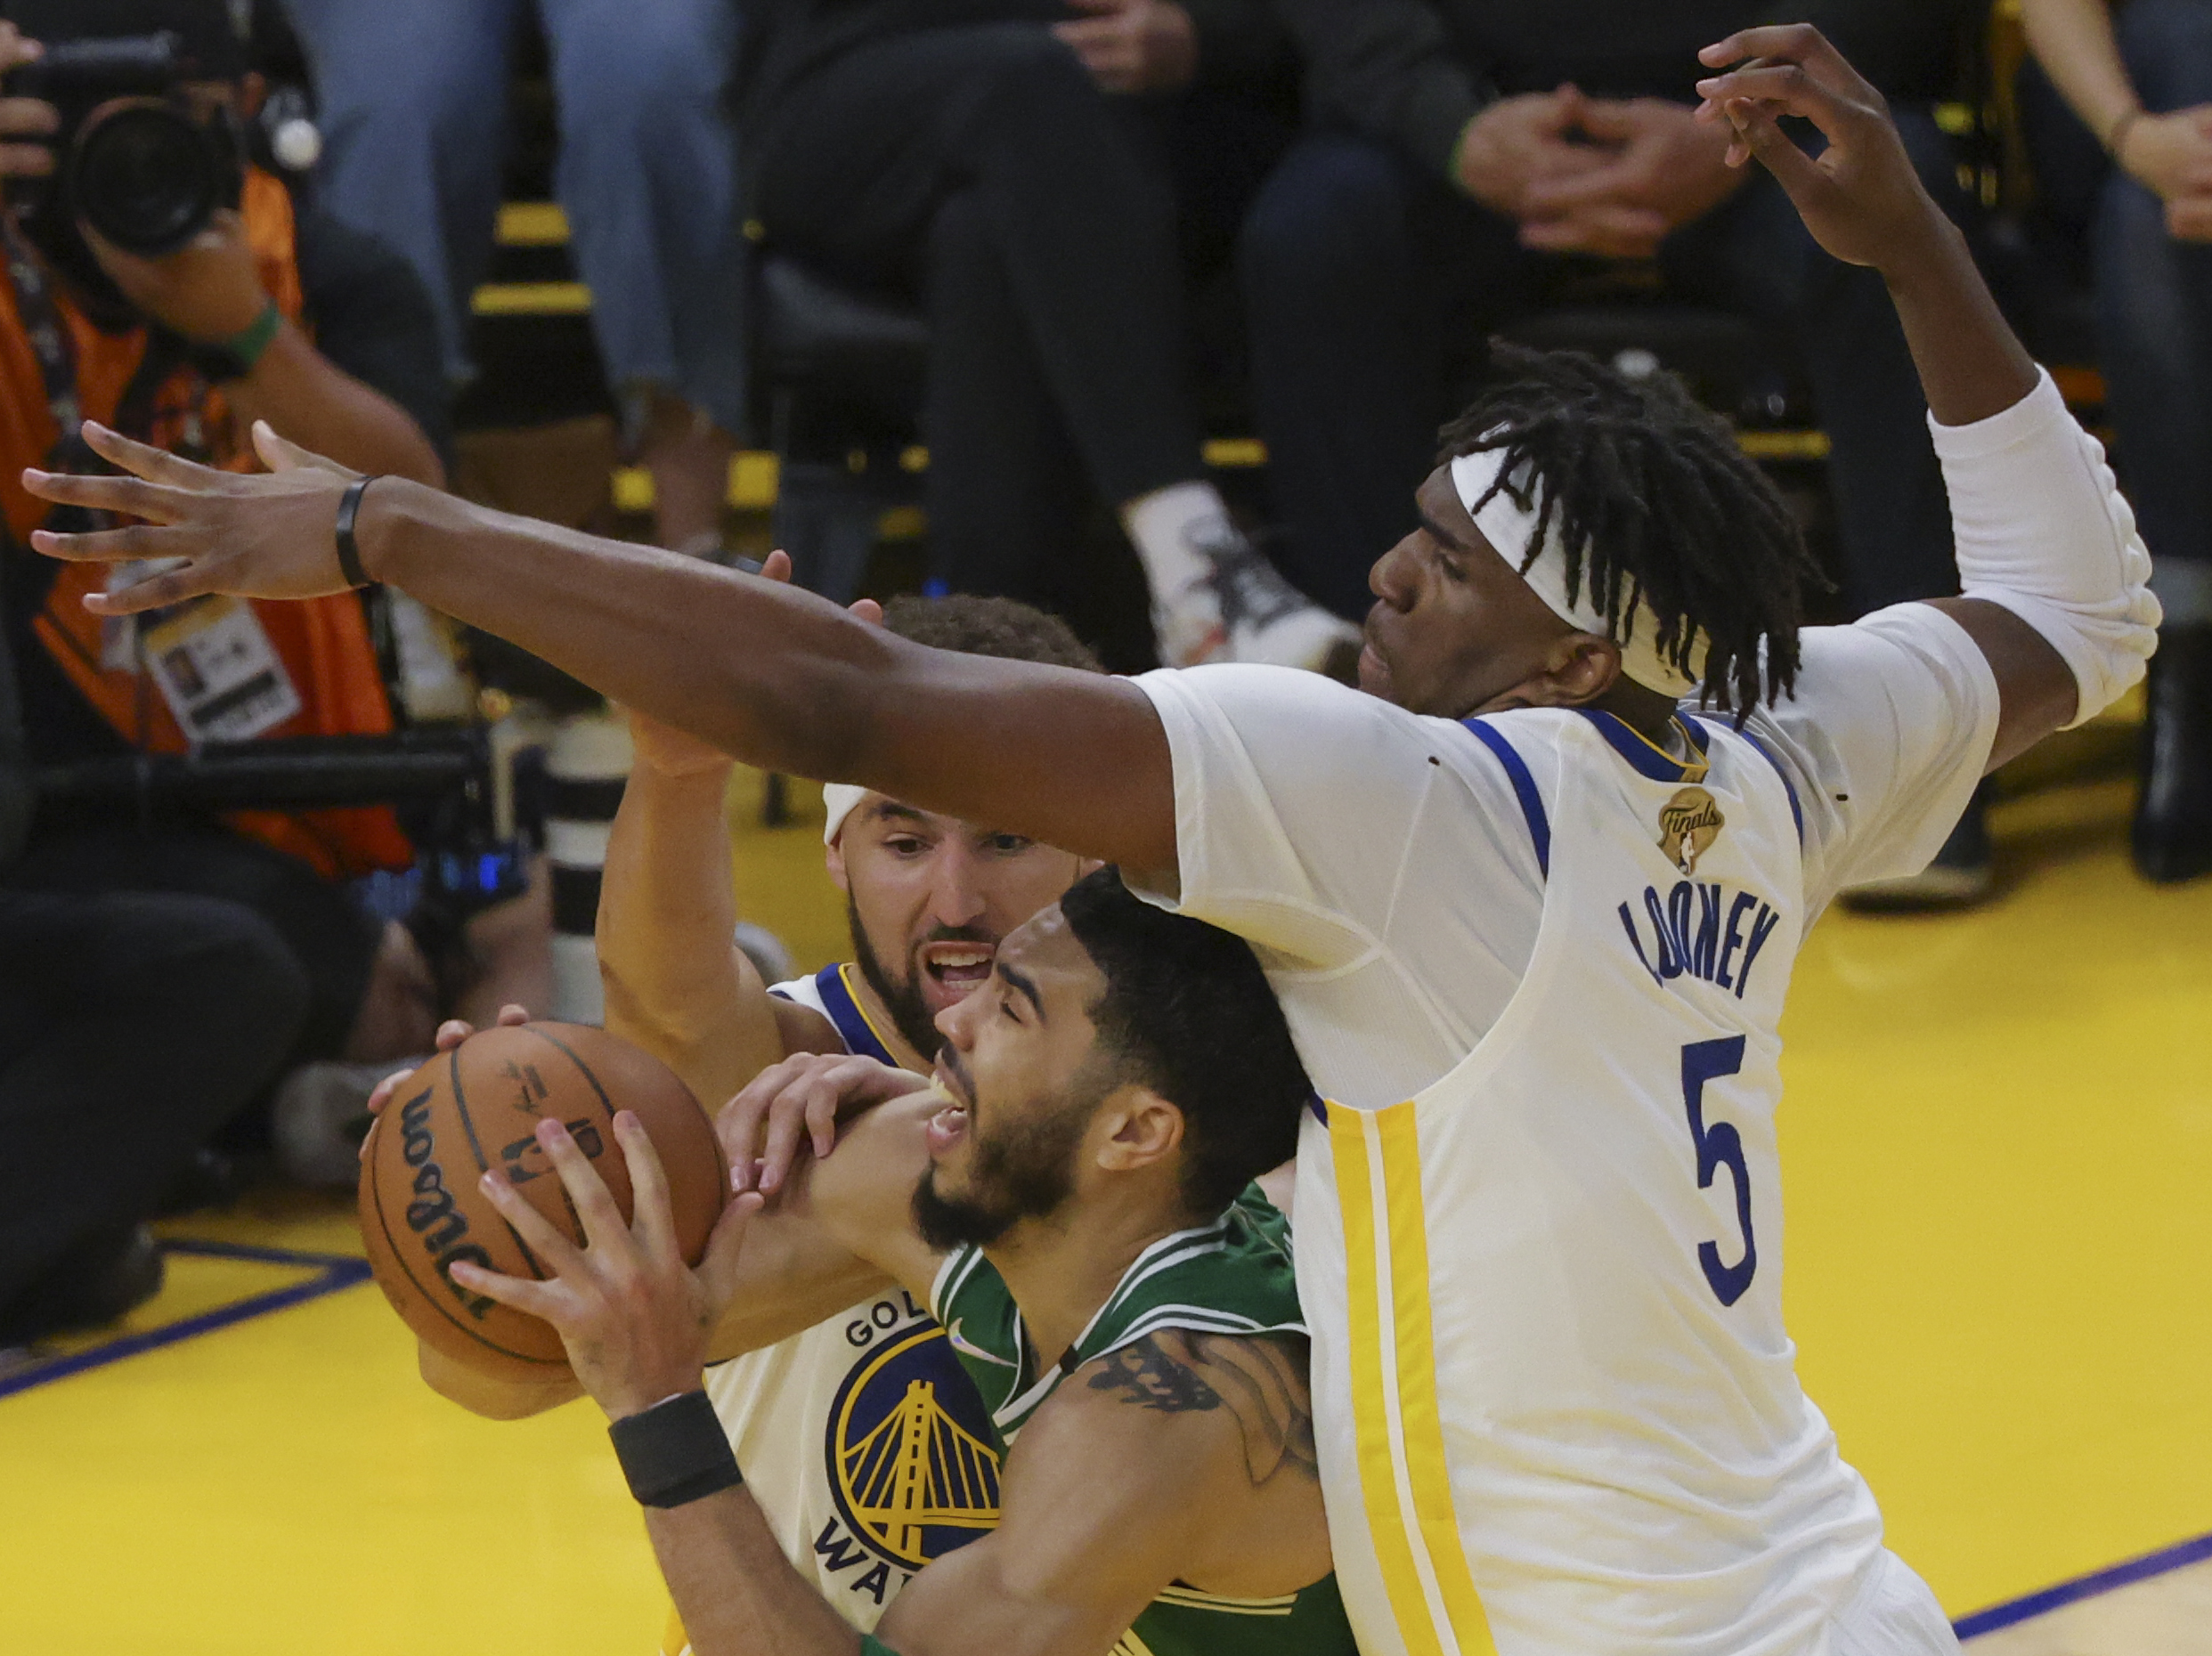 Celtics were resilient in Game 1; Warriors now must respond